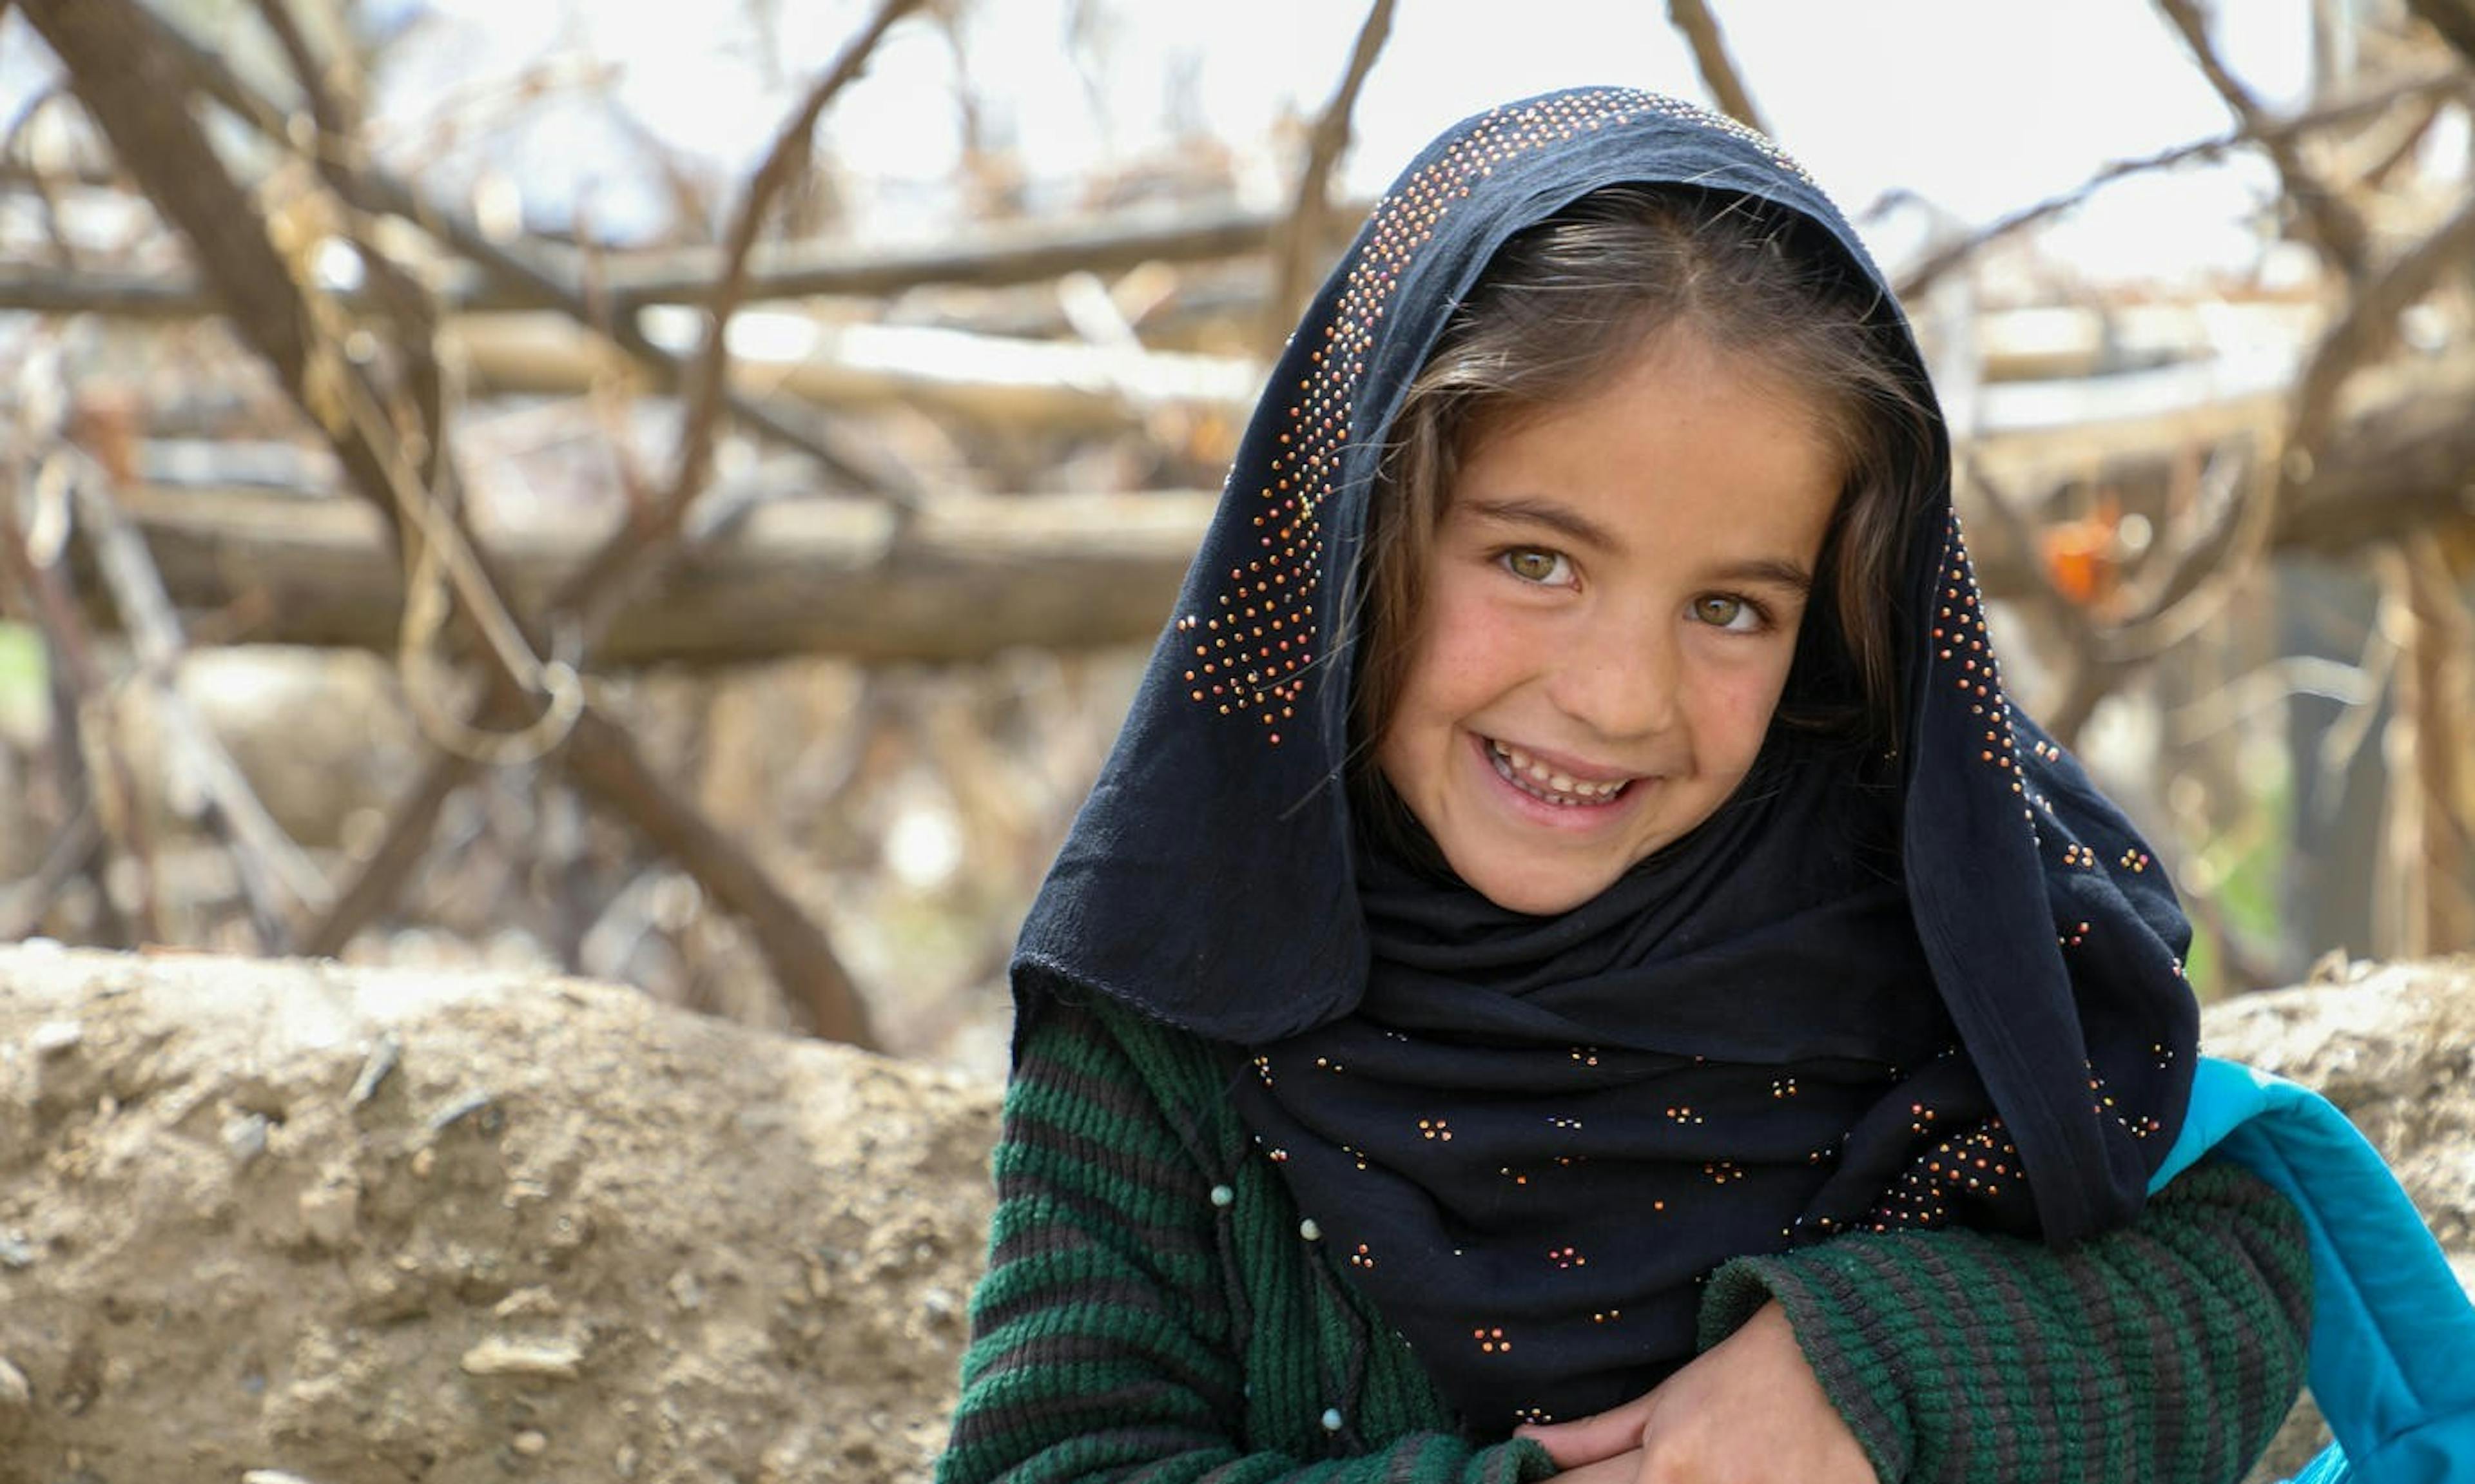 The girls at Gulab Khail Village's community-based accelerated learning centre in Maidan Wardak Province have recently completed primary grade one and have just begun primary grade two.